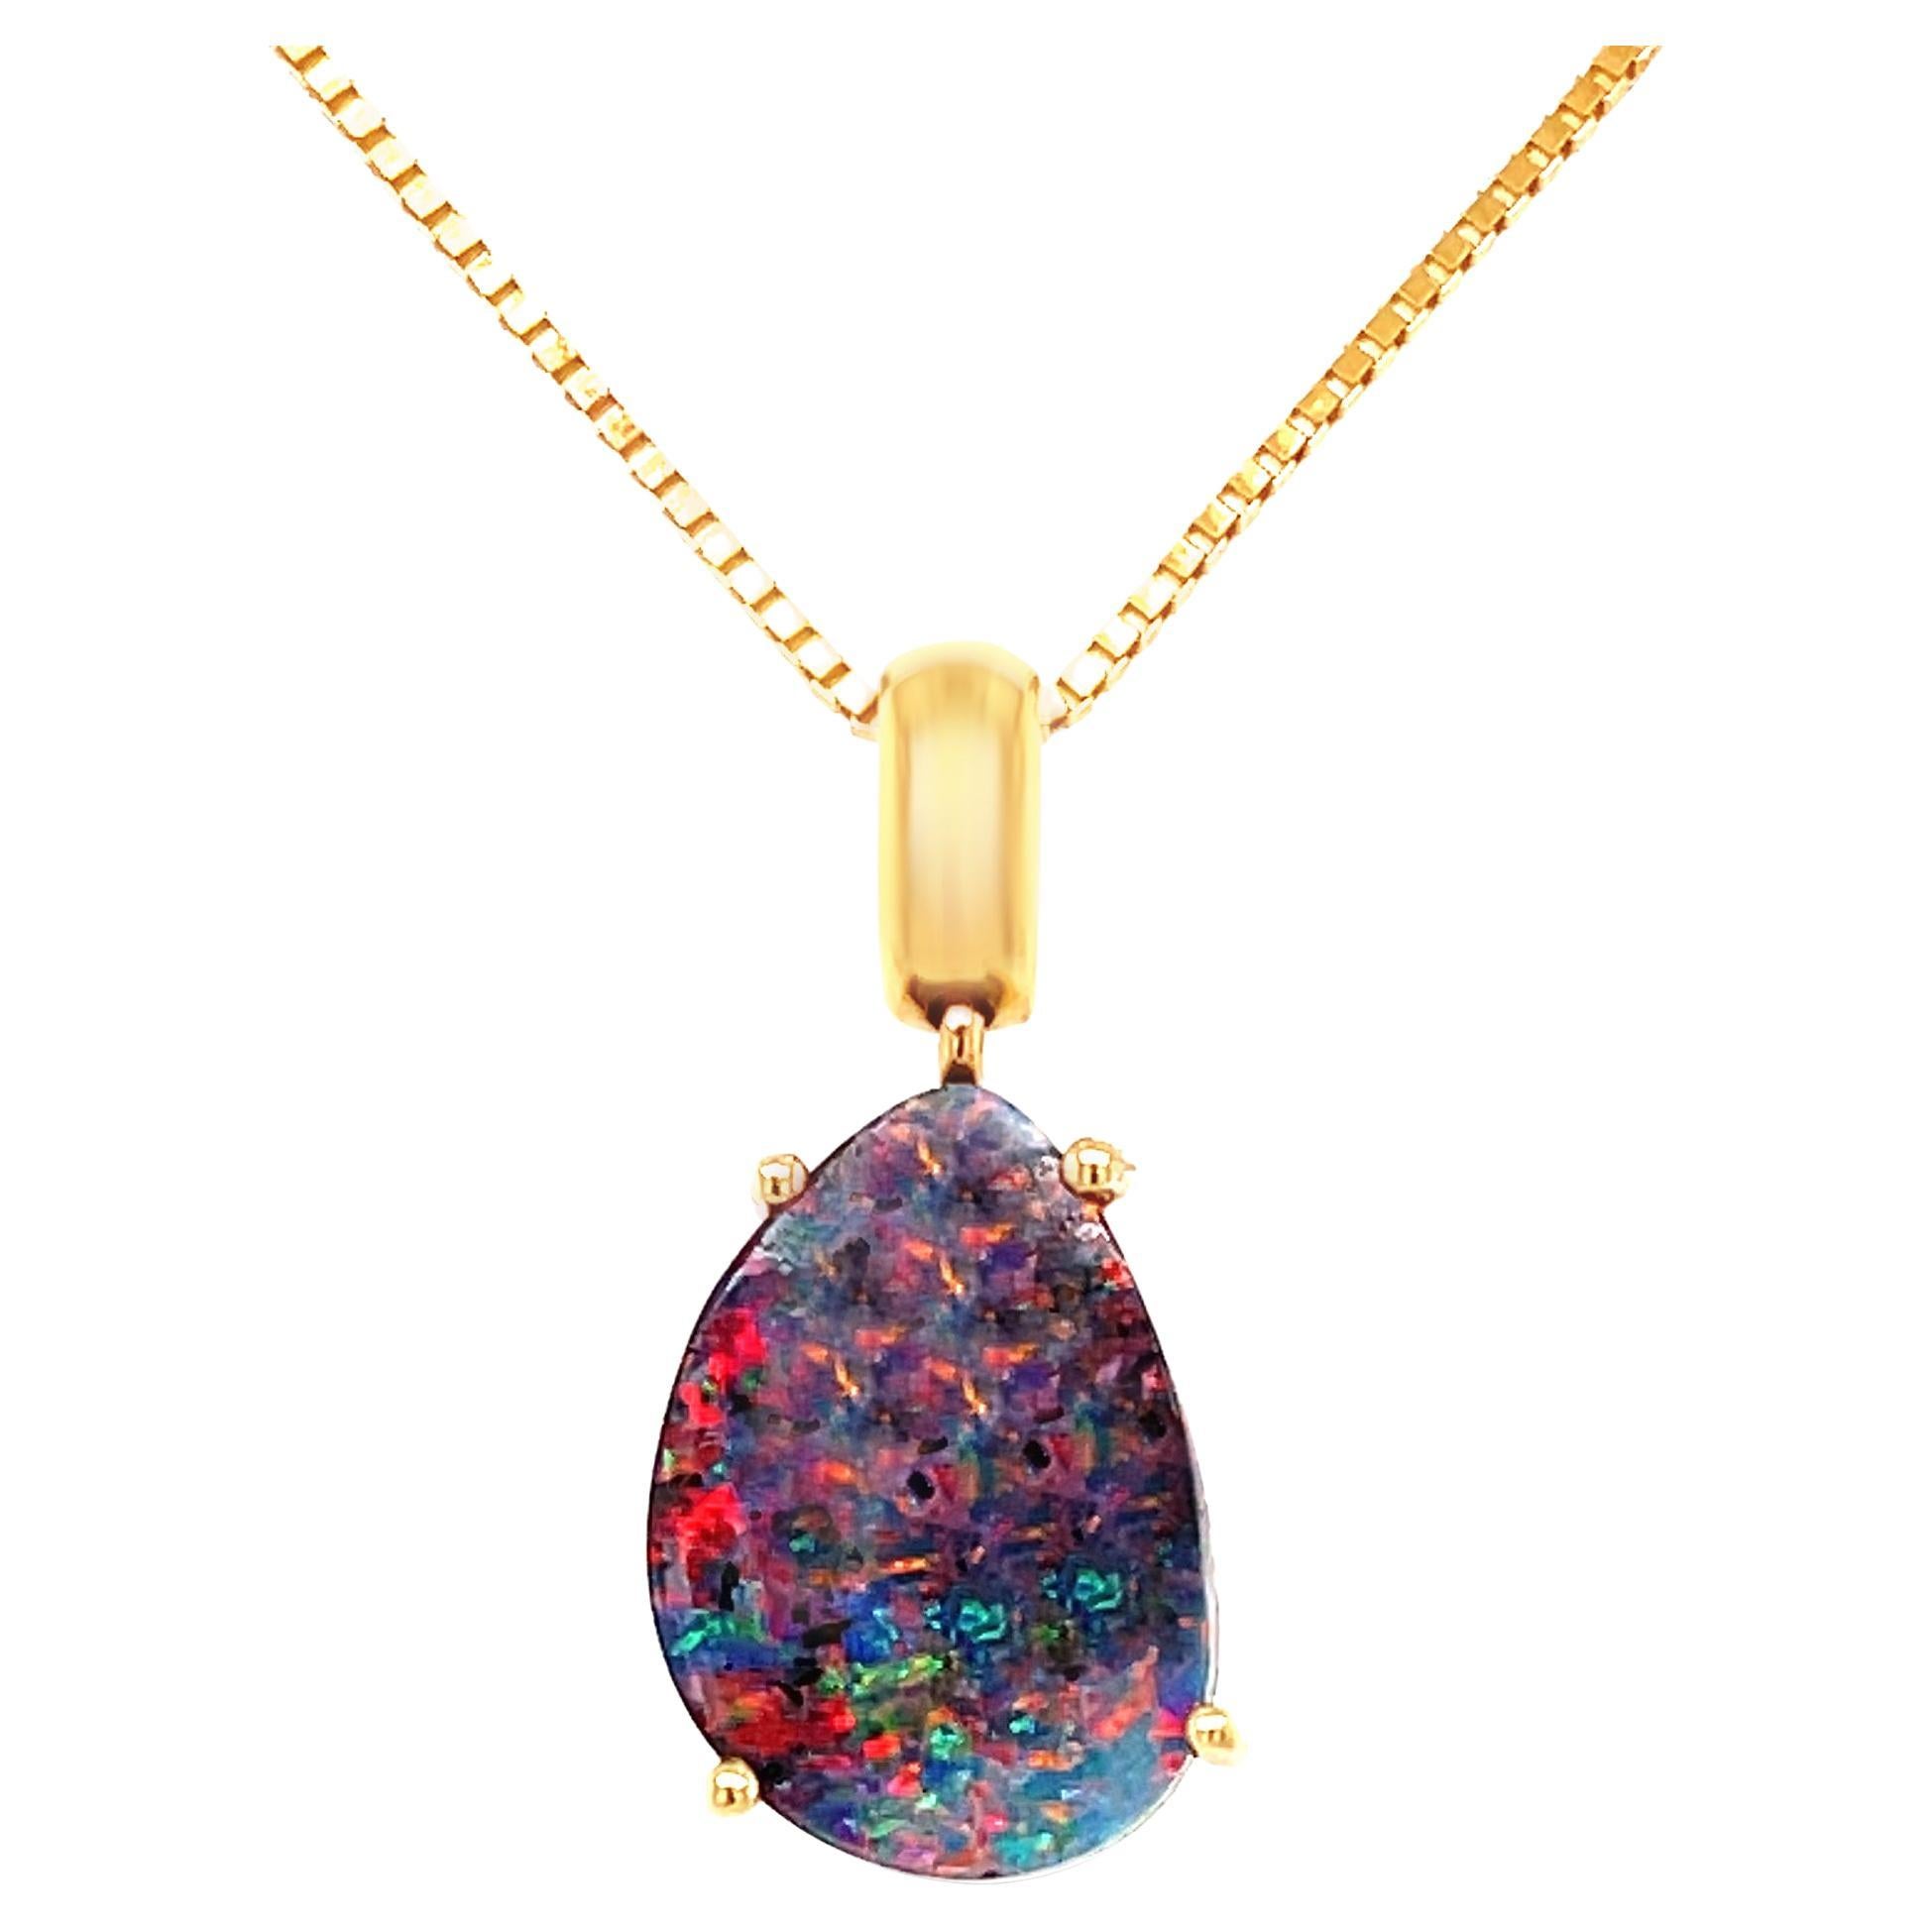 Natural Australian 4.46ct Boulder Opal Pendant Necklace in 18K Yellow Gold